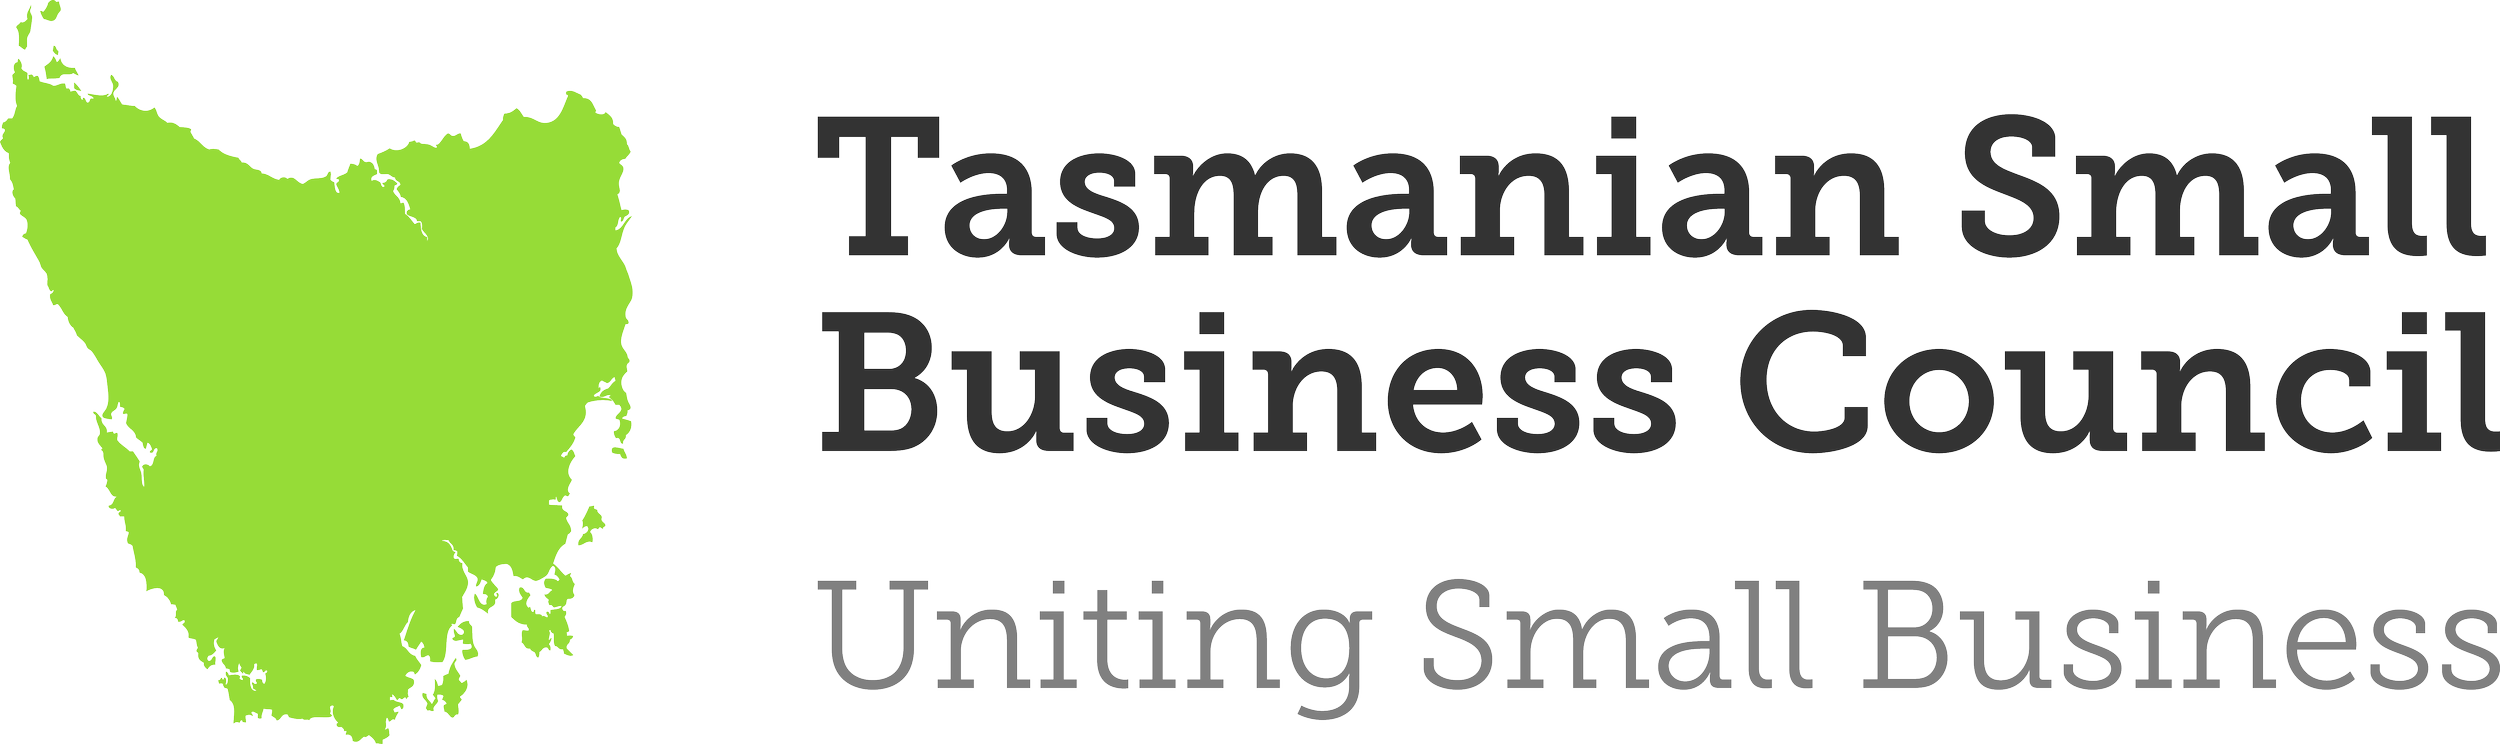 Tasmanian Small Business Council.png